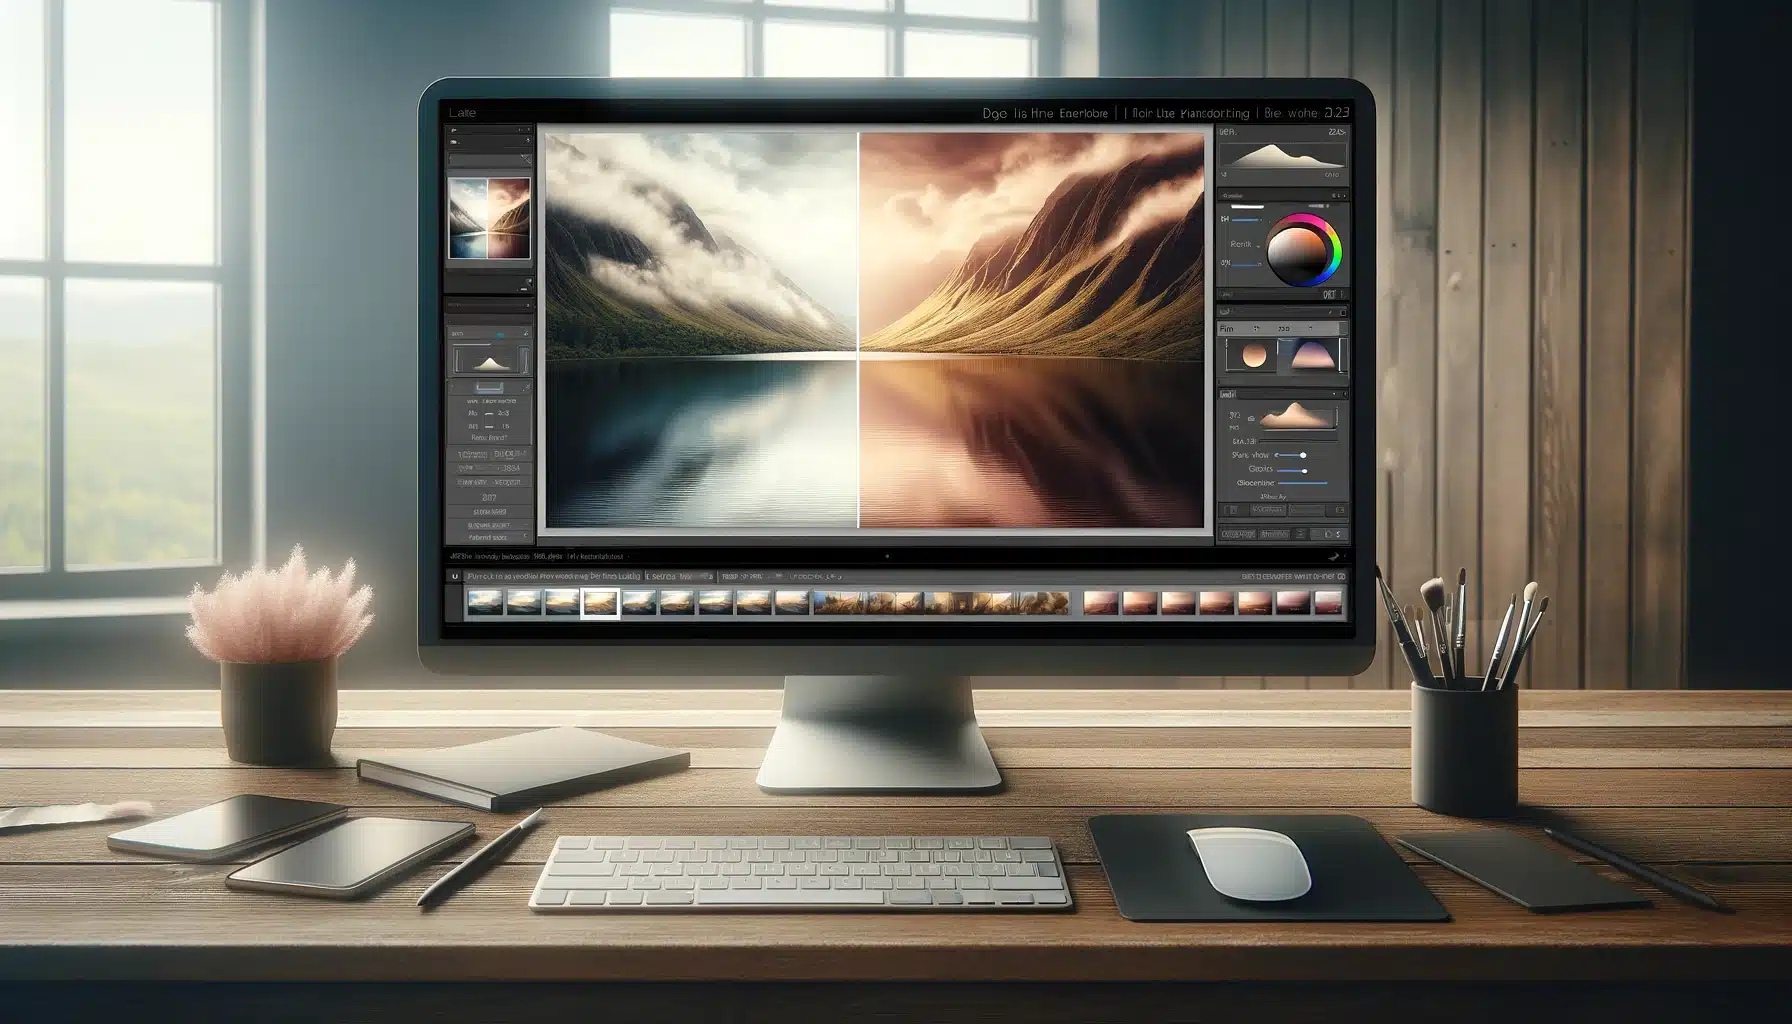 Photo editing workspace applying Gaussian Blur on an image with a clear and a blurred section